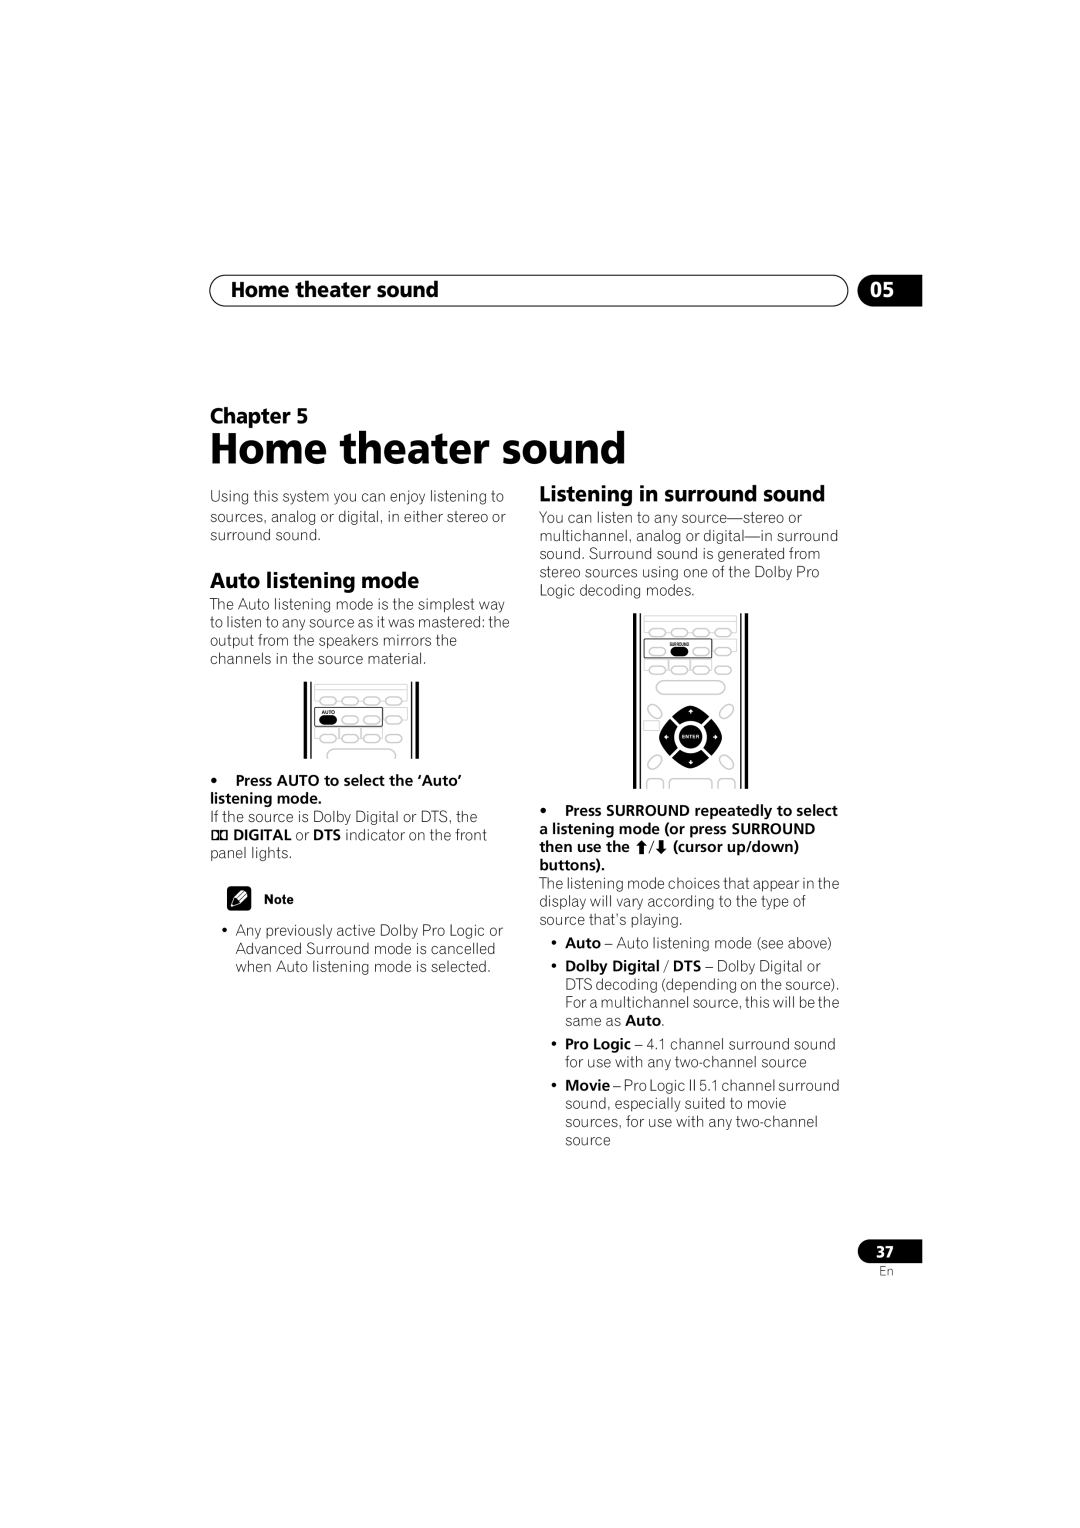 Pioneer S-HTD330 manual Home theater sound, Auto listening mode, Listening in surround sound, Chapter 